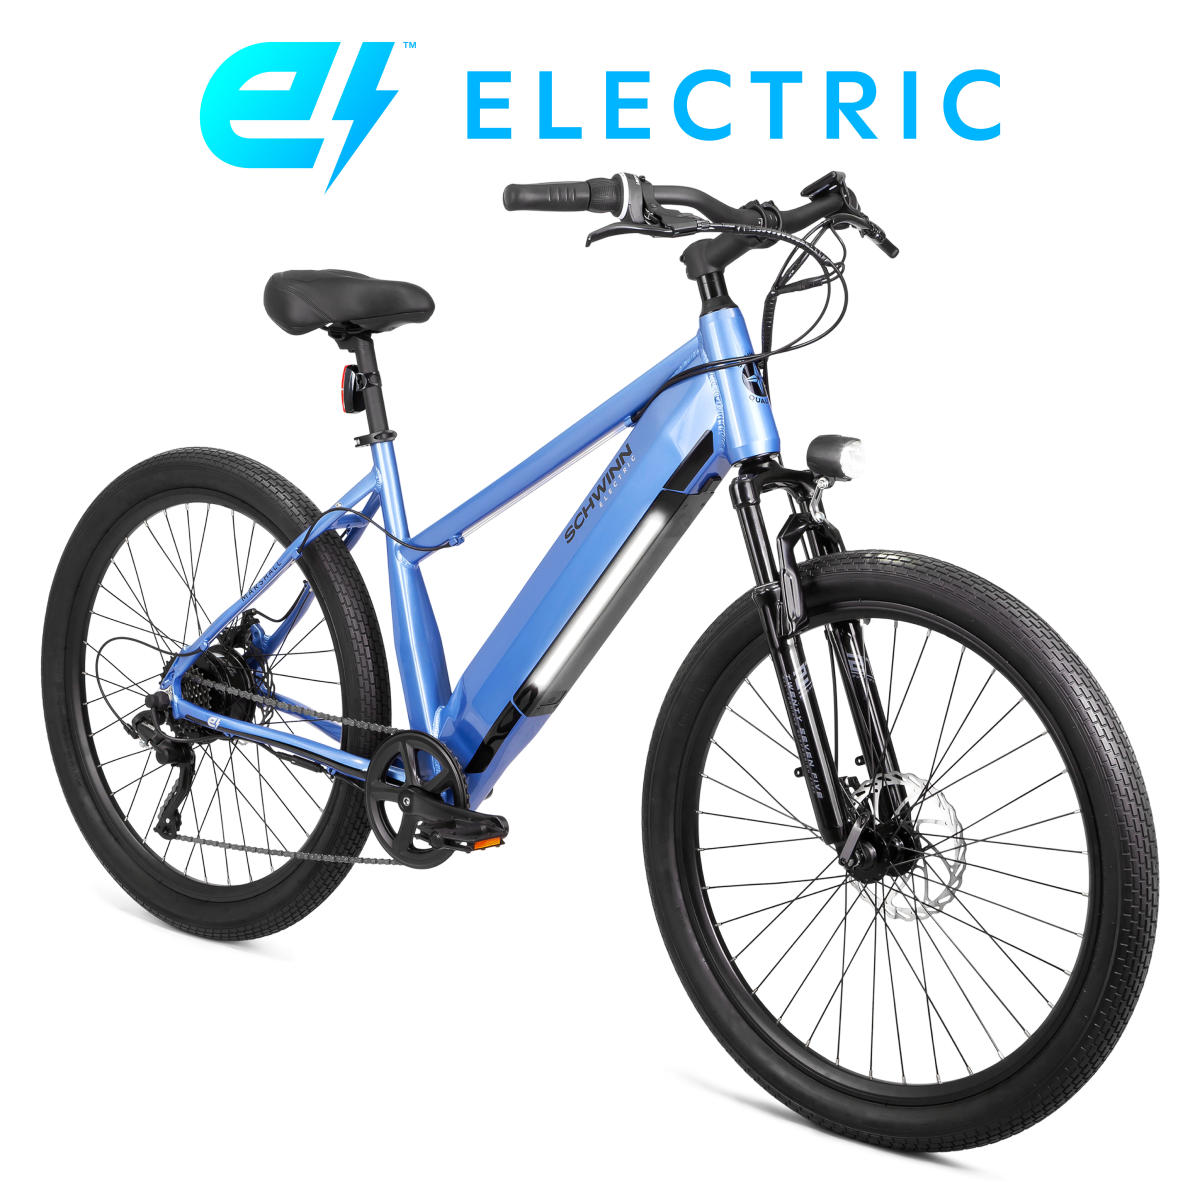 A blue electric bicycle from Schwinn